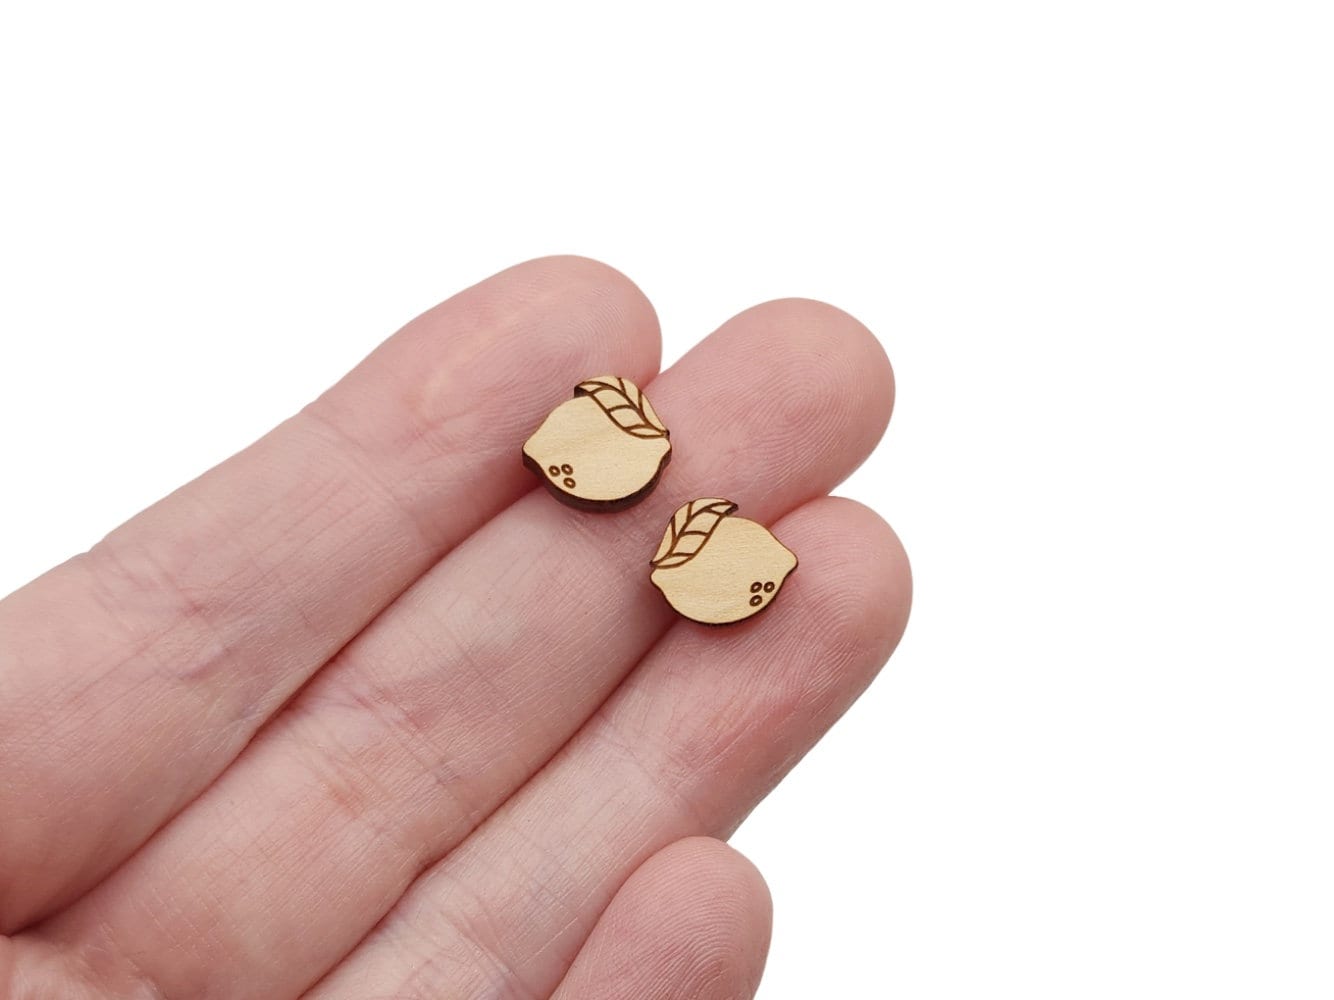 These lemon & leaf engraved flat-back wood cabochon blanks are the perfect size to create stud earrings. You can paint them or keep the natural wood look with stains.